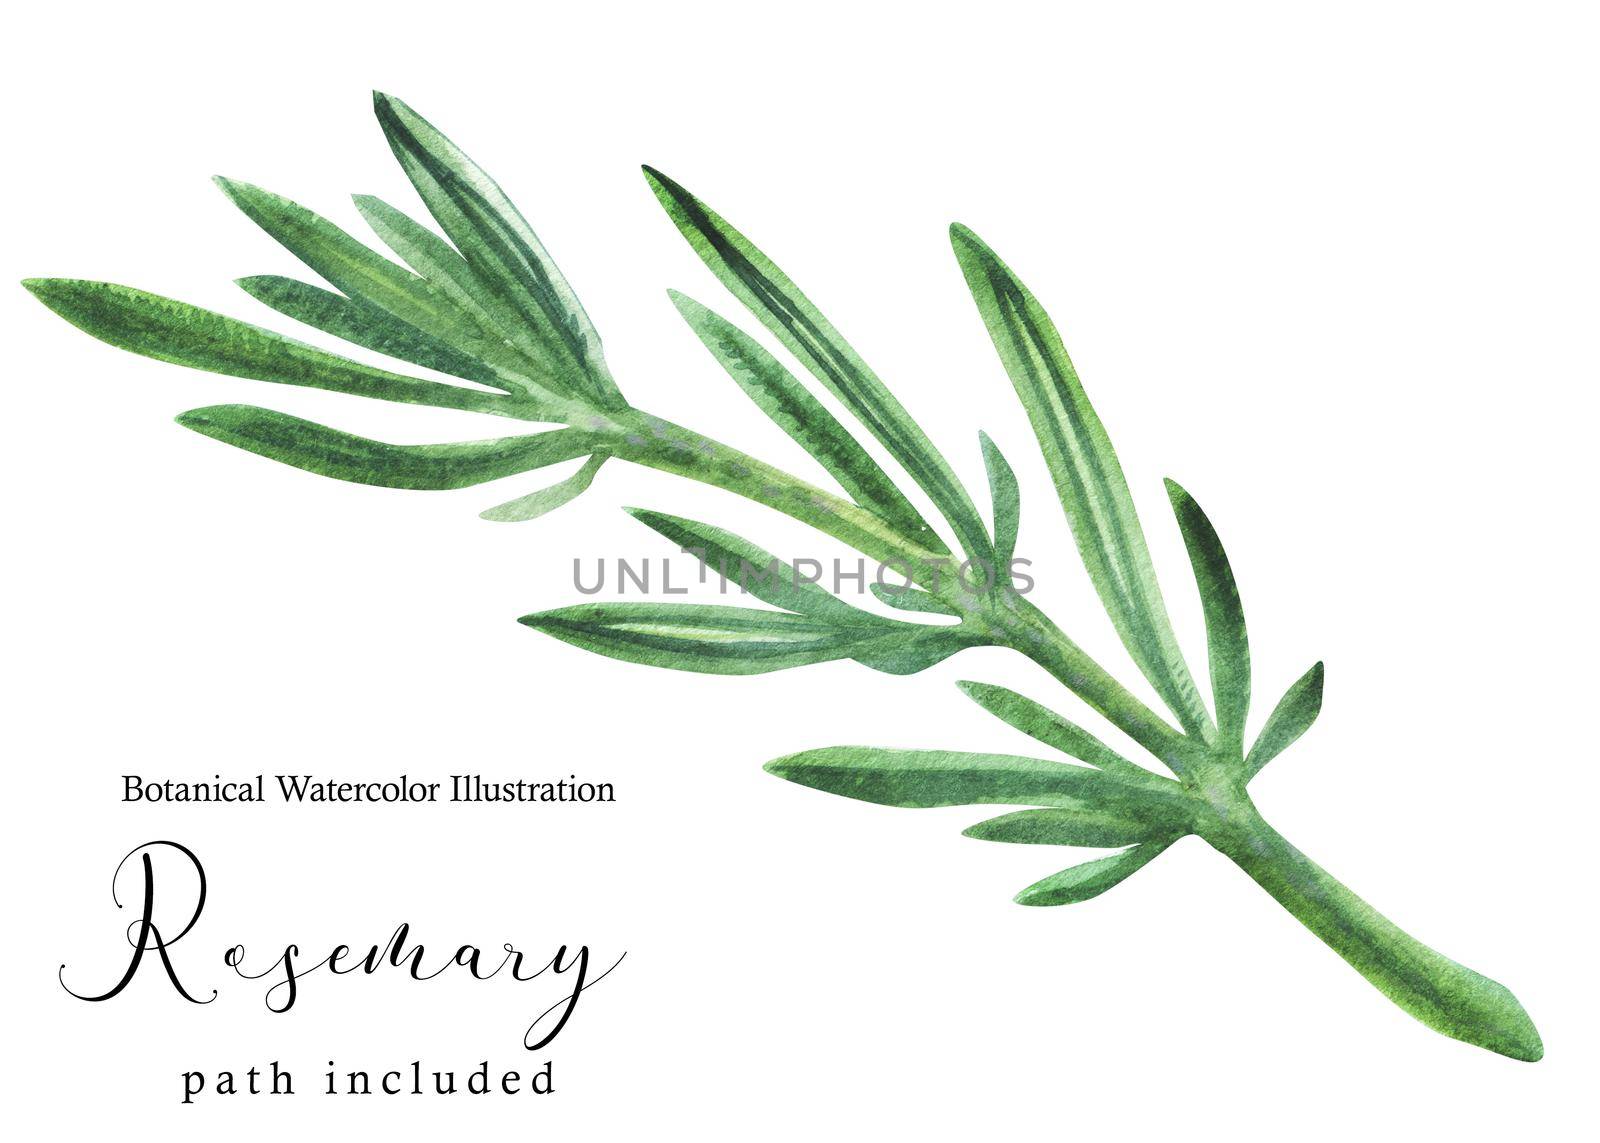 Rosemary green stem branch. Botanical watercolor illustration, path included